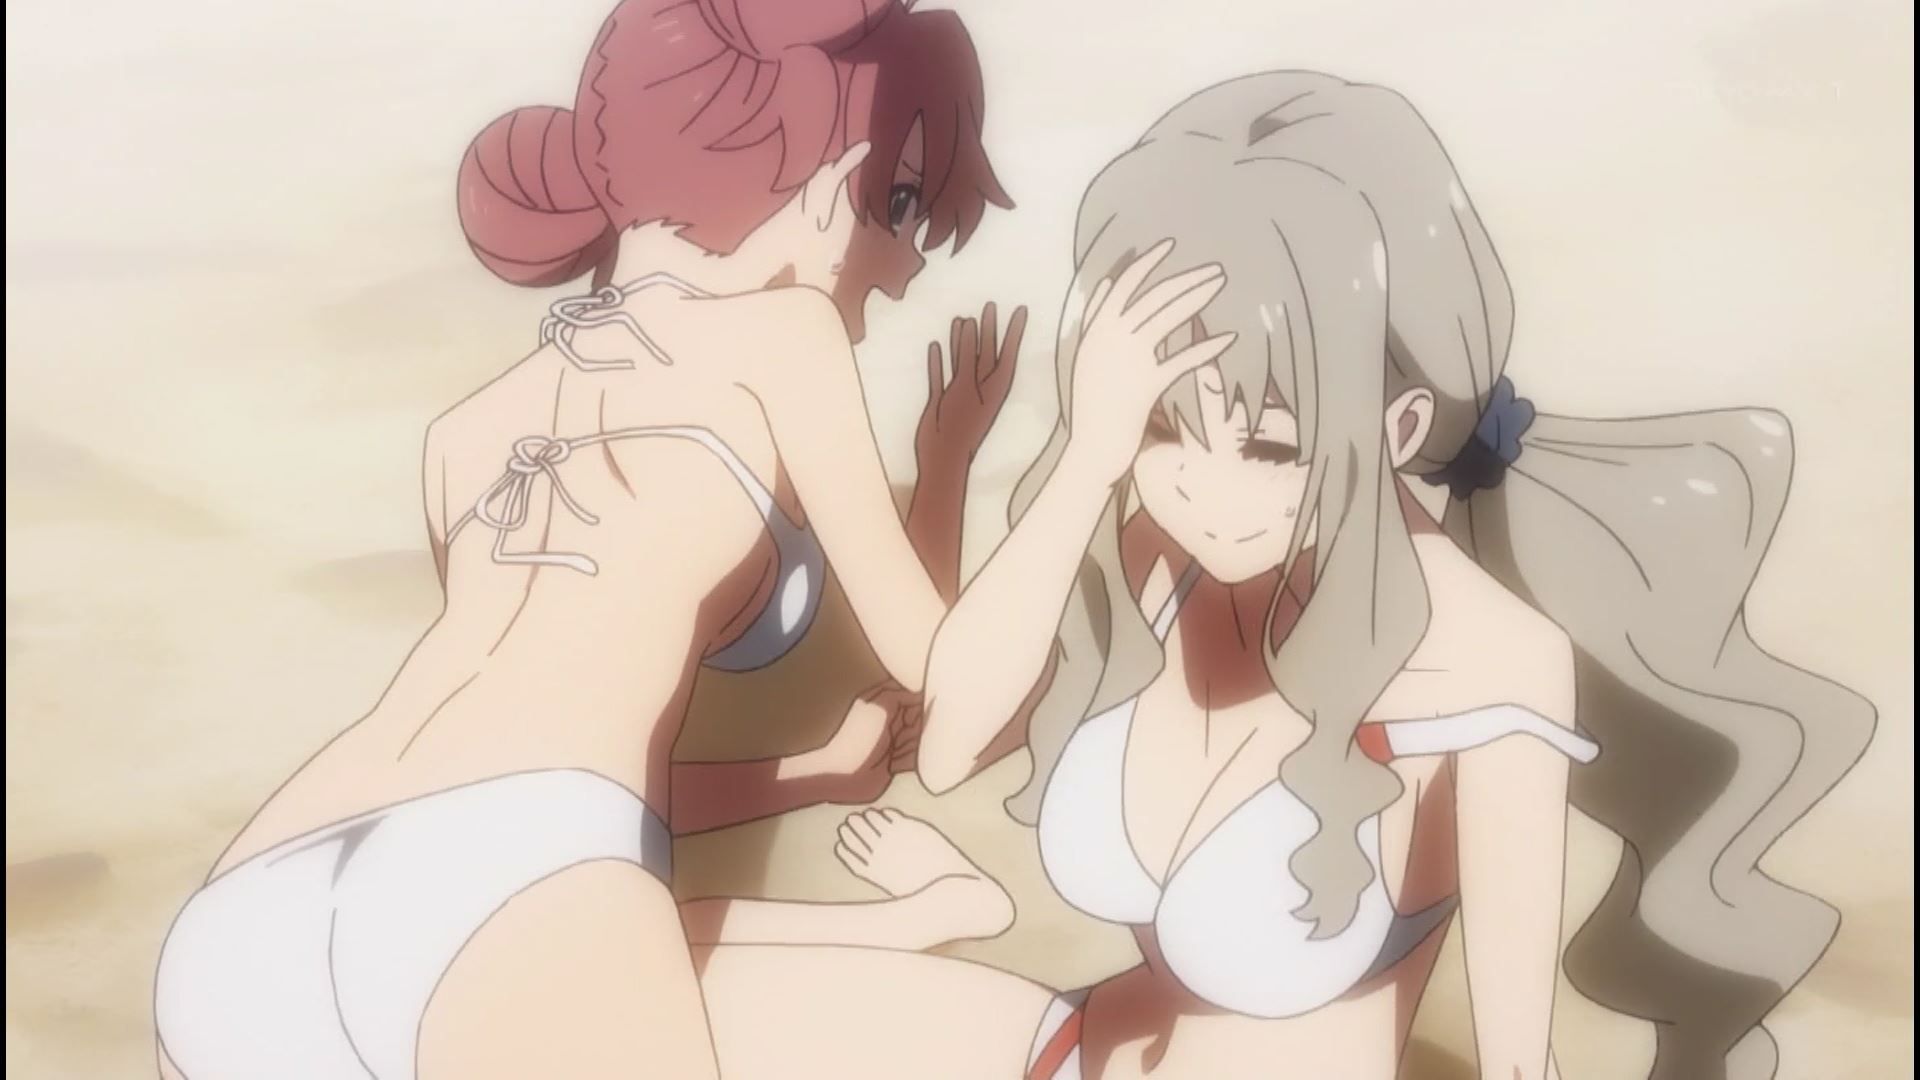 Anime [Darling in the franc kiss] seven girls erotic breasts and buttocks swimsuit times in the story! 9